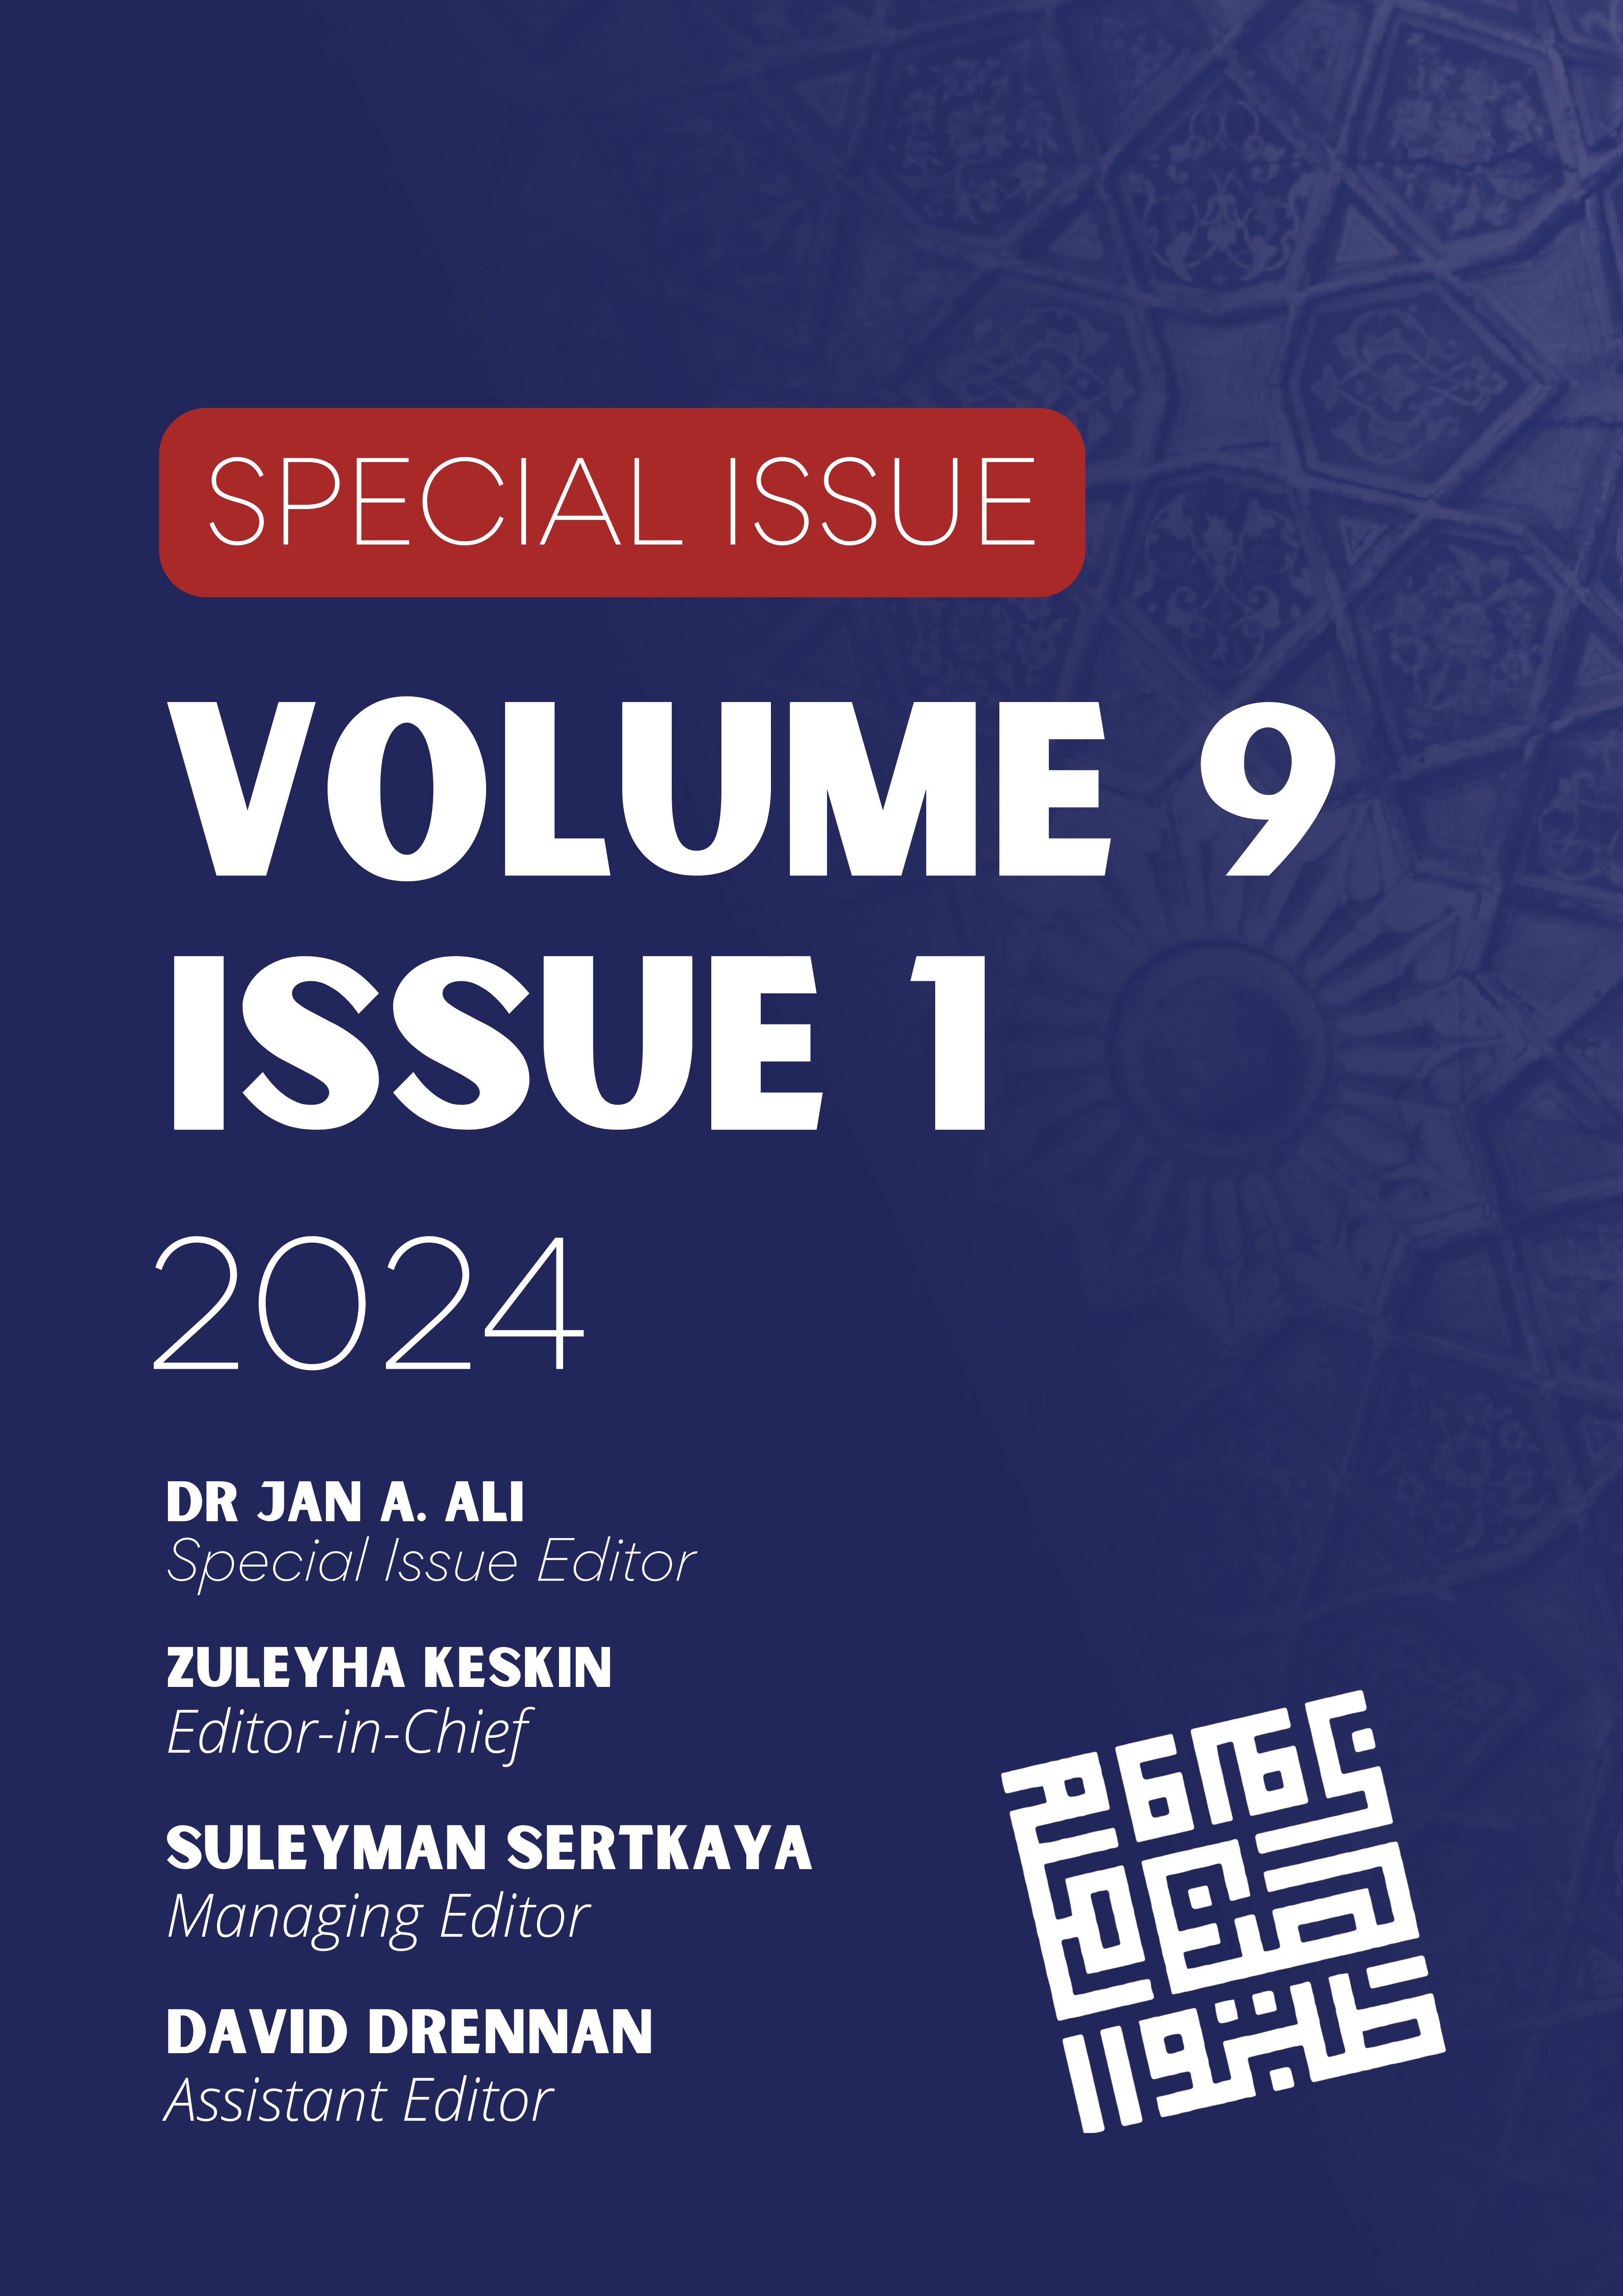 AJIS Volume 9, Issue 1, 2024 Special Issue - Islamic and Muslim Studies in the Period of Great Transformation